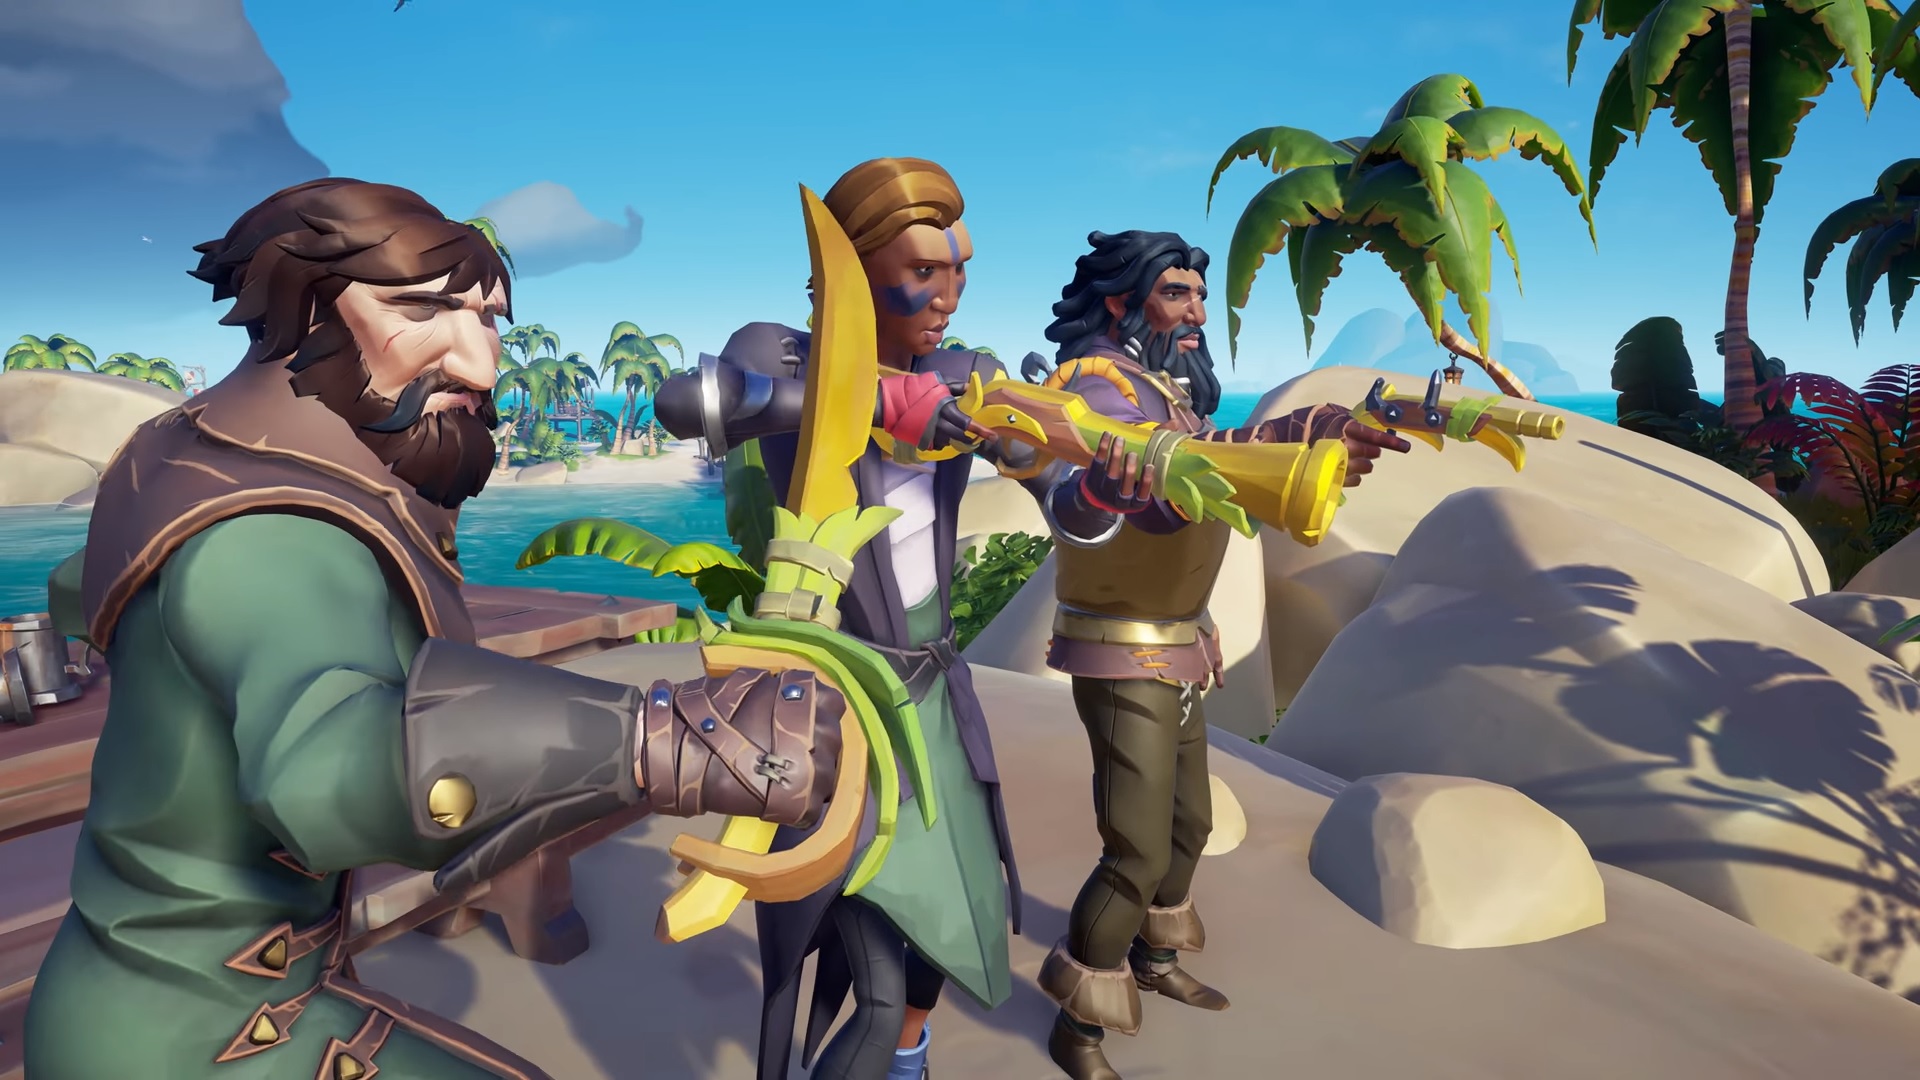 sea of thieves game